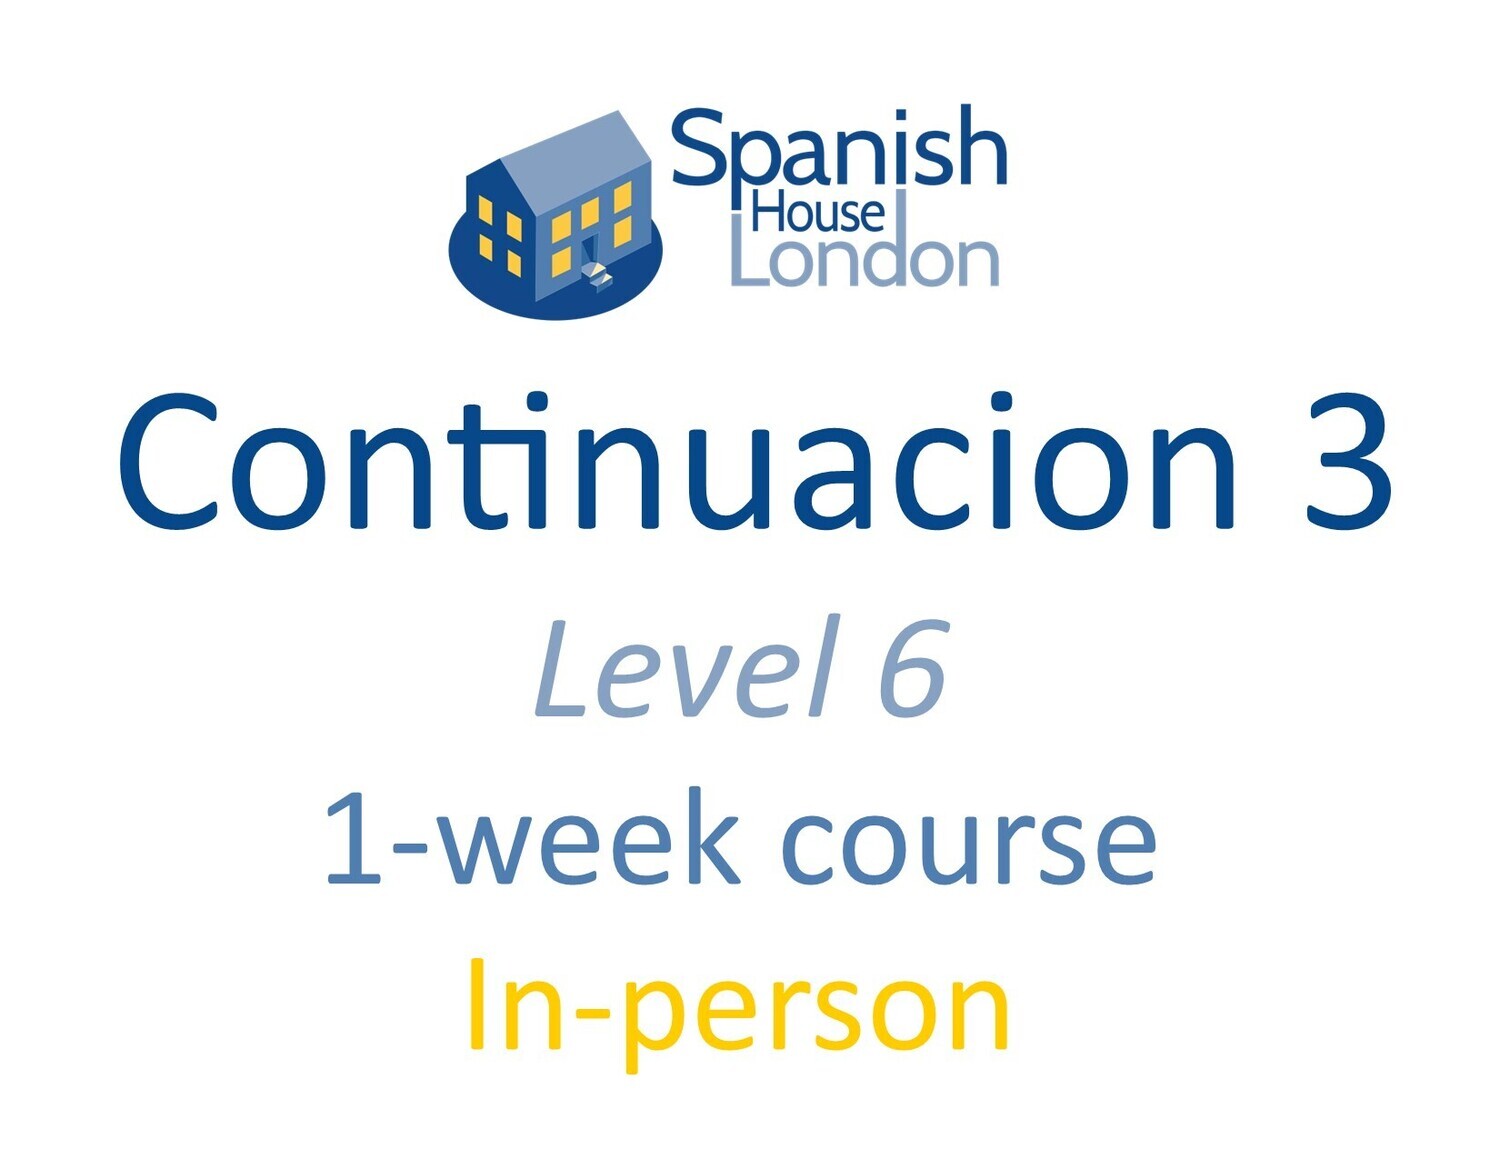 One-Week Intensive Continuacion 3 Course starting on 9th October at 10.30am in Clapham North